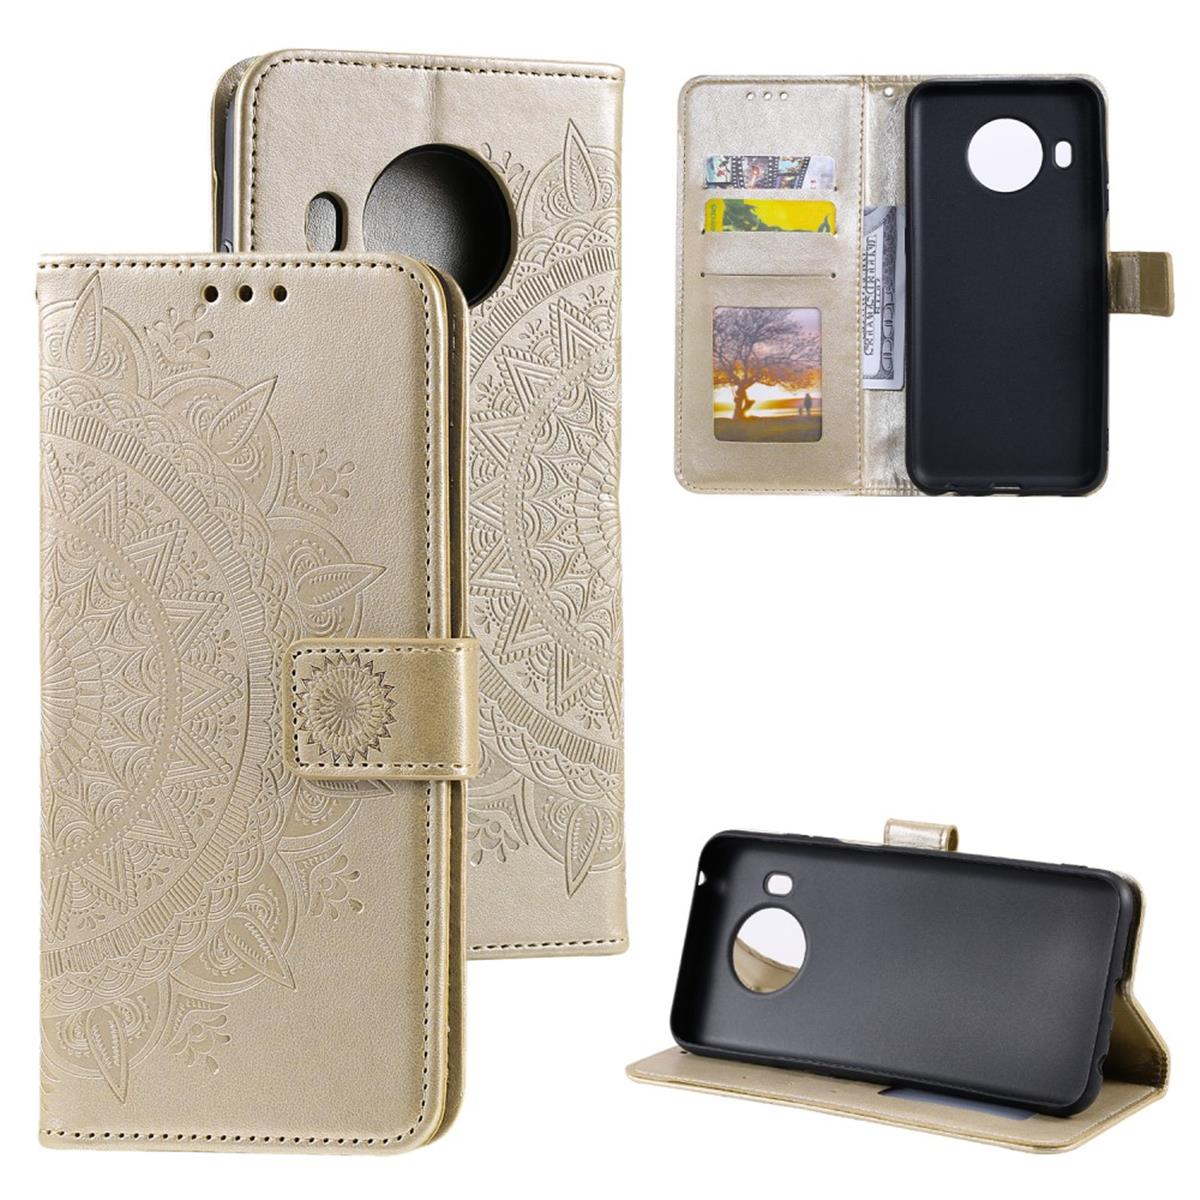 Nokia, Klapphülle Mandala Gold mit COVERKINGZ X10/X20, Bookcover, Muster,